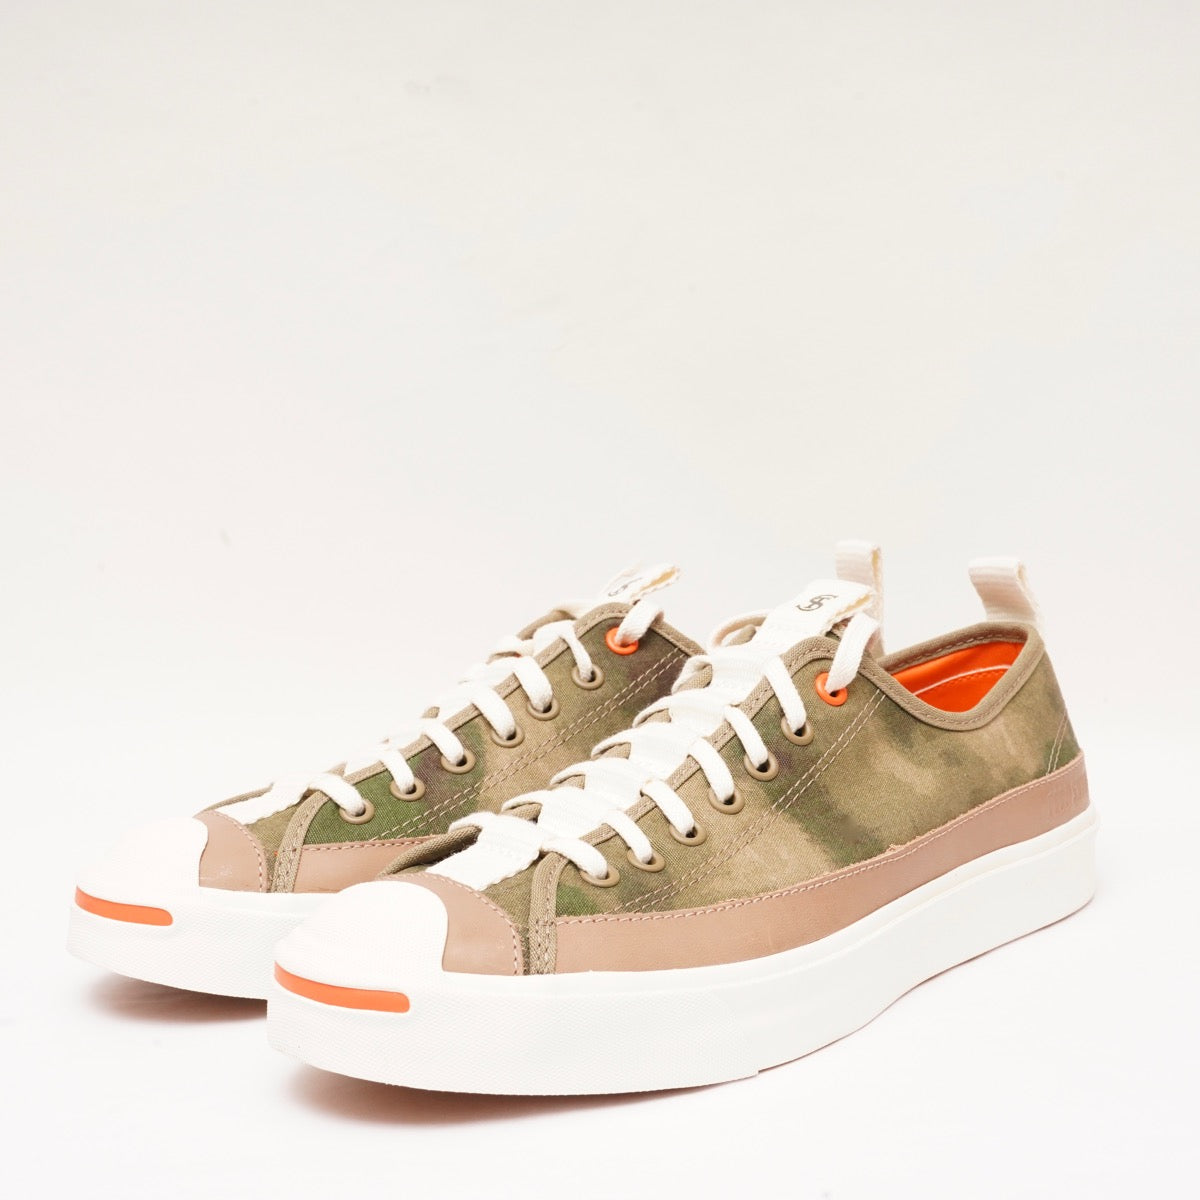 CONVERSE X TODD SNYDER JACK PURCELL 173058C